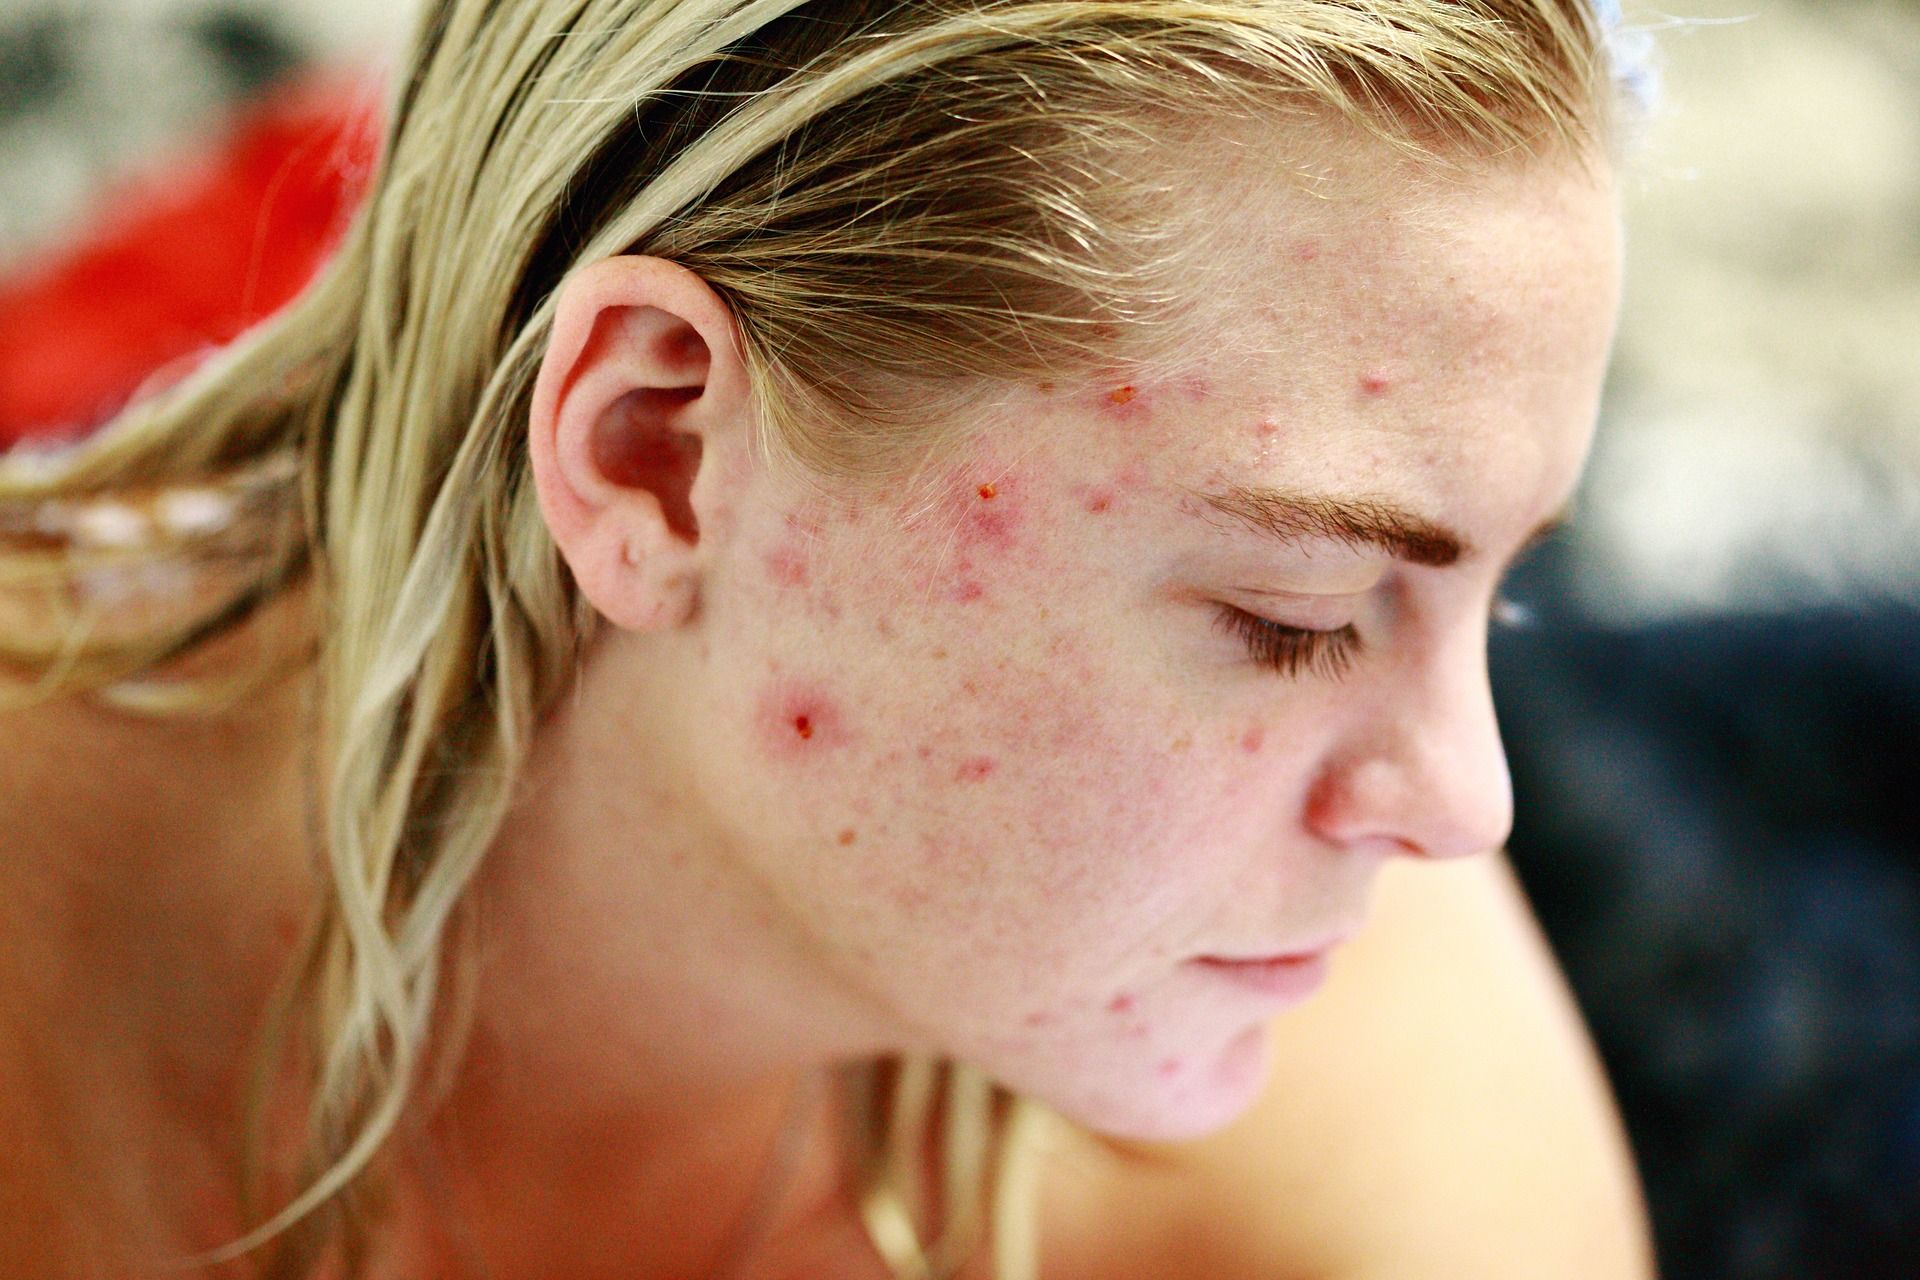 Acne Problems: Scientists Say New Antibiotic Treatment Could Be A Game-Changer